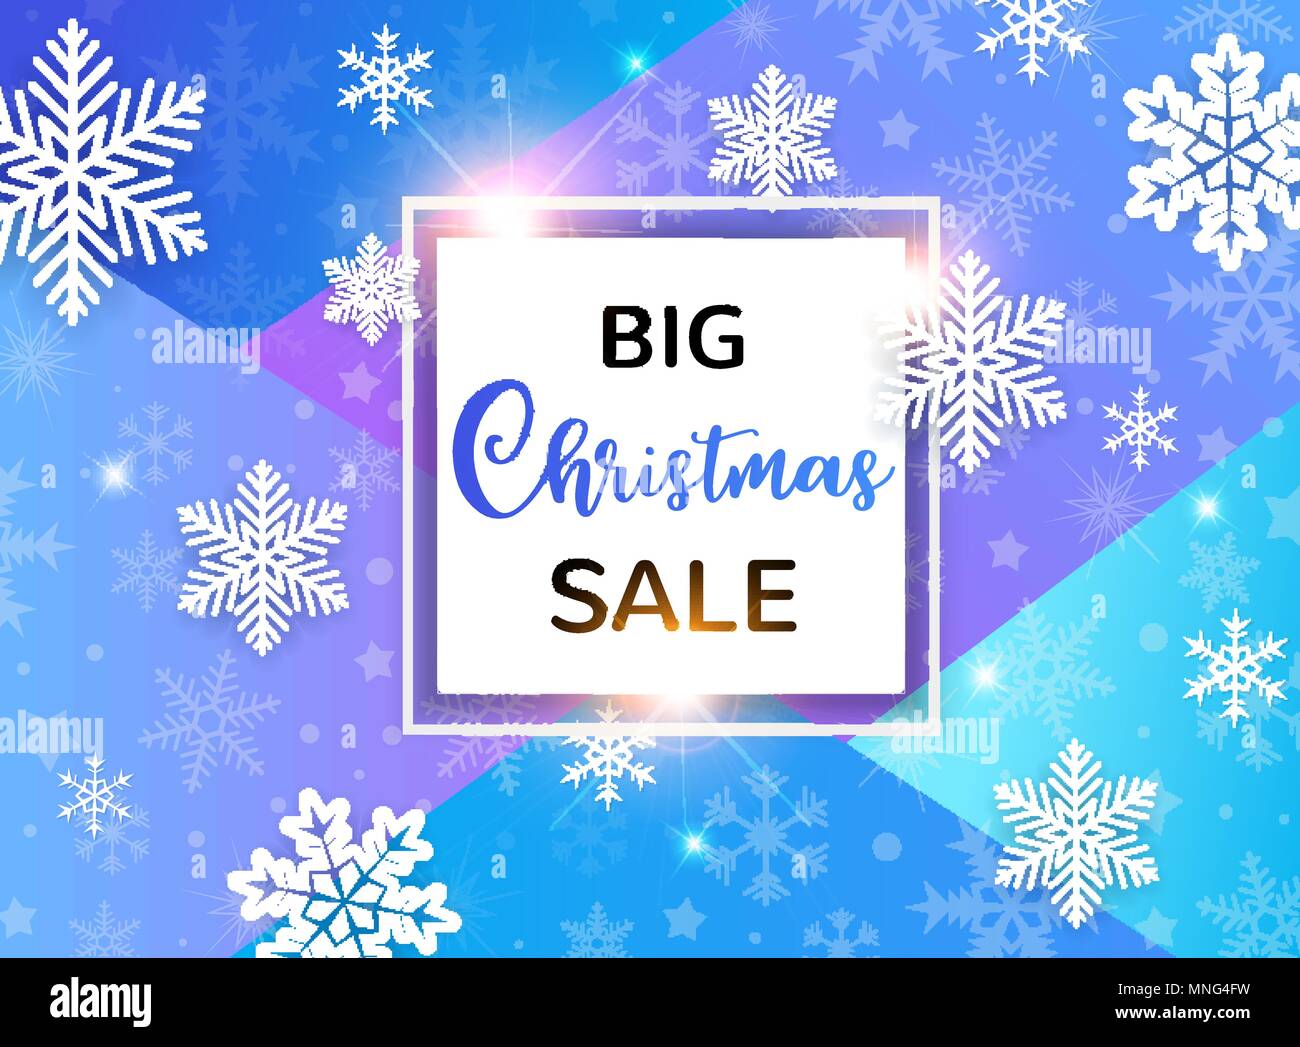 Design for seasonal Christmas sale. White snowflakes on a blue abstract geometrical background. Stock Vector